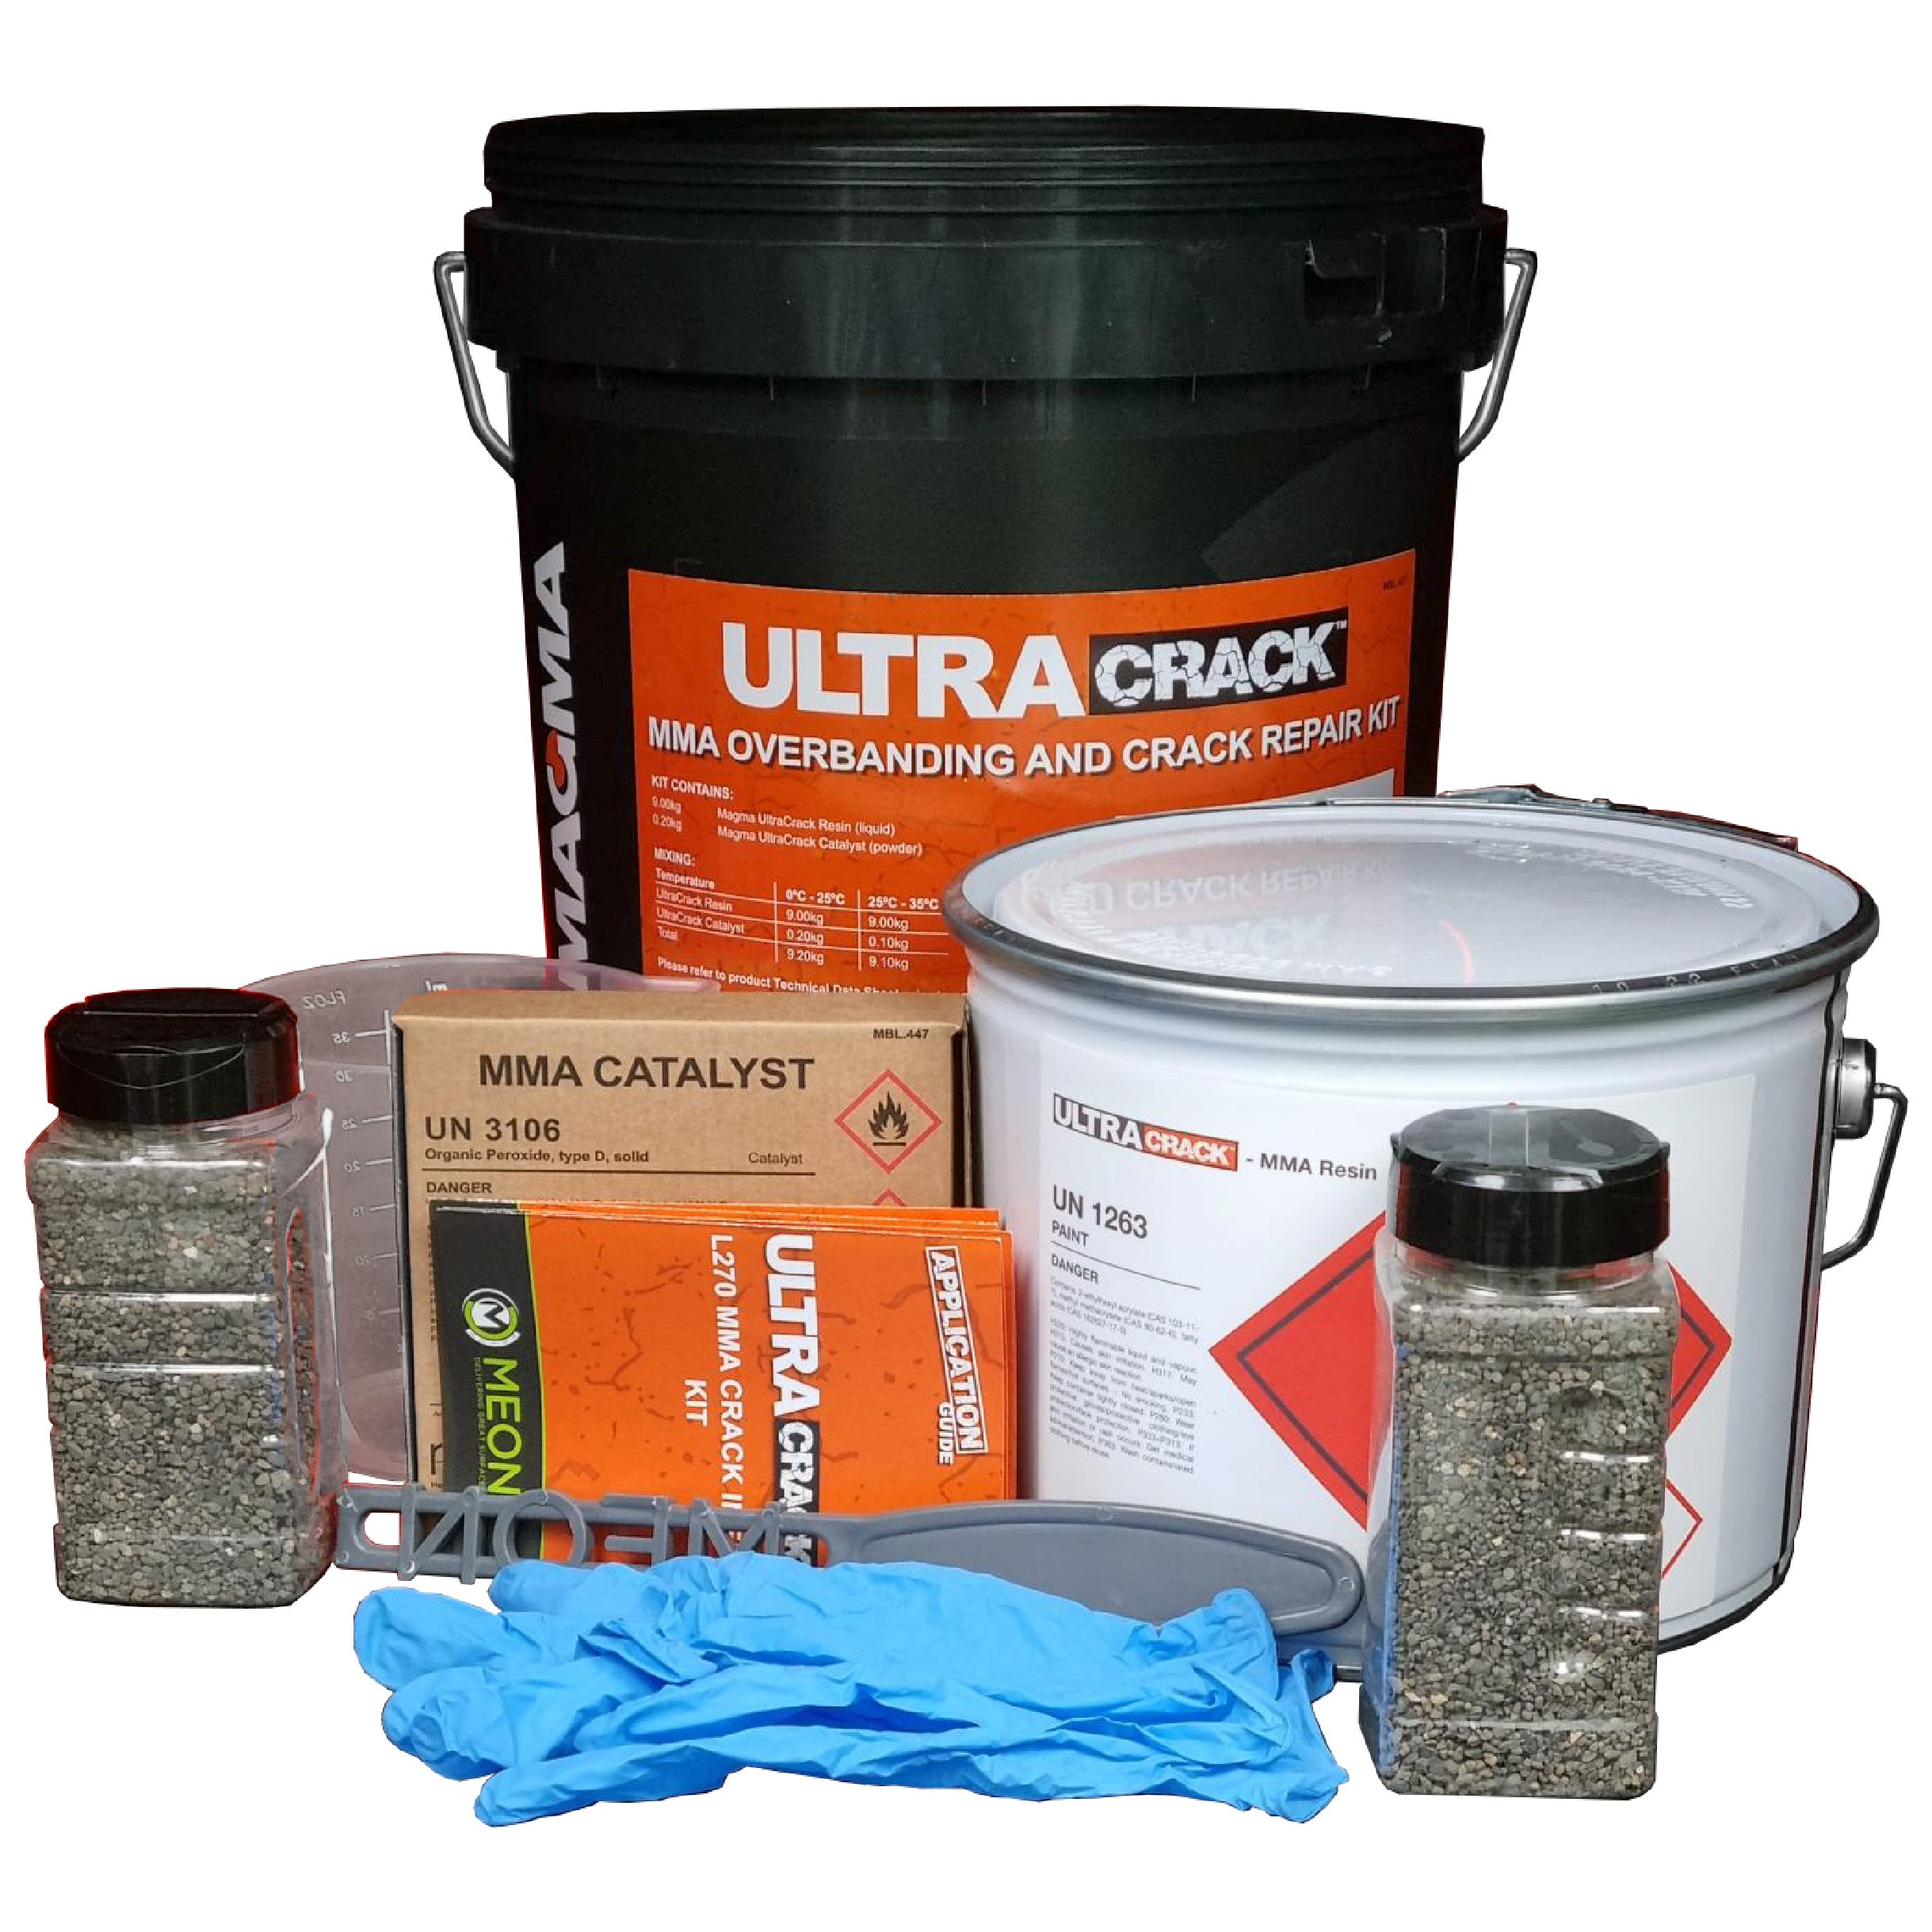 Meon's UltraCrack L270 MMA Overbanding and Crack Repair Kit